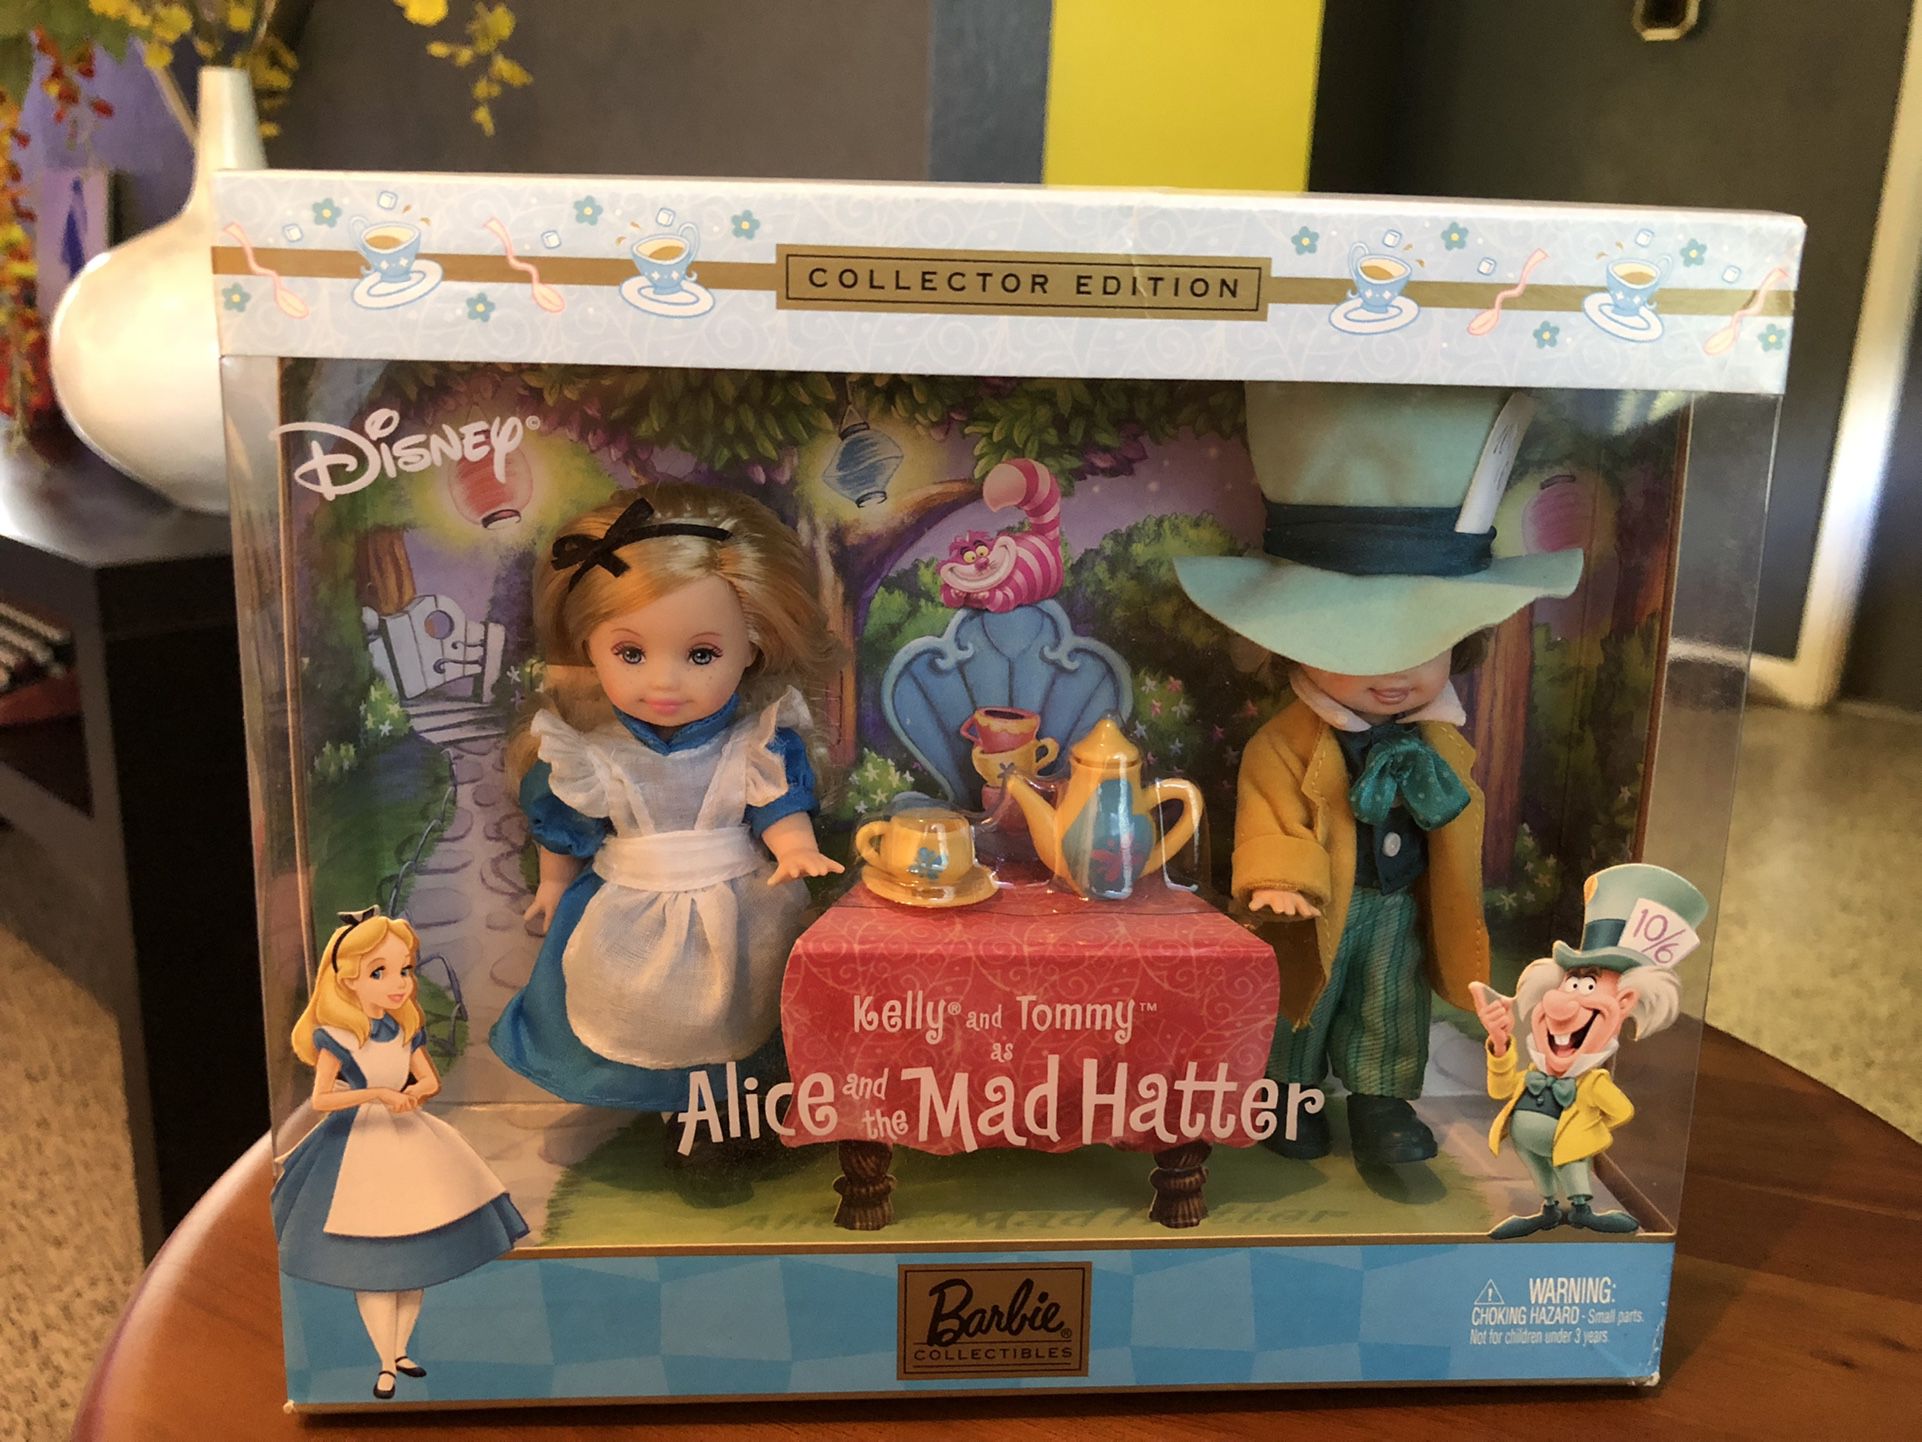 Collector Toy Set 2002 Mattel / Disney Kelly And Tommy As Alice And The Mad Hatter .